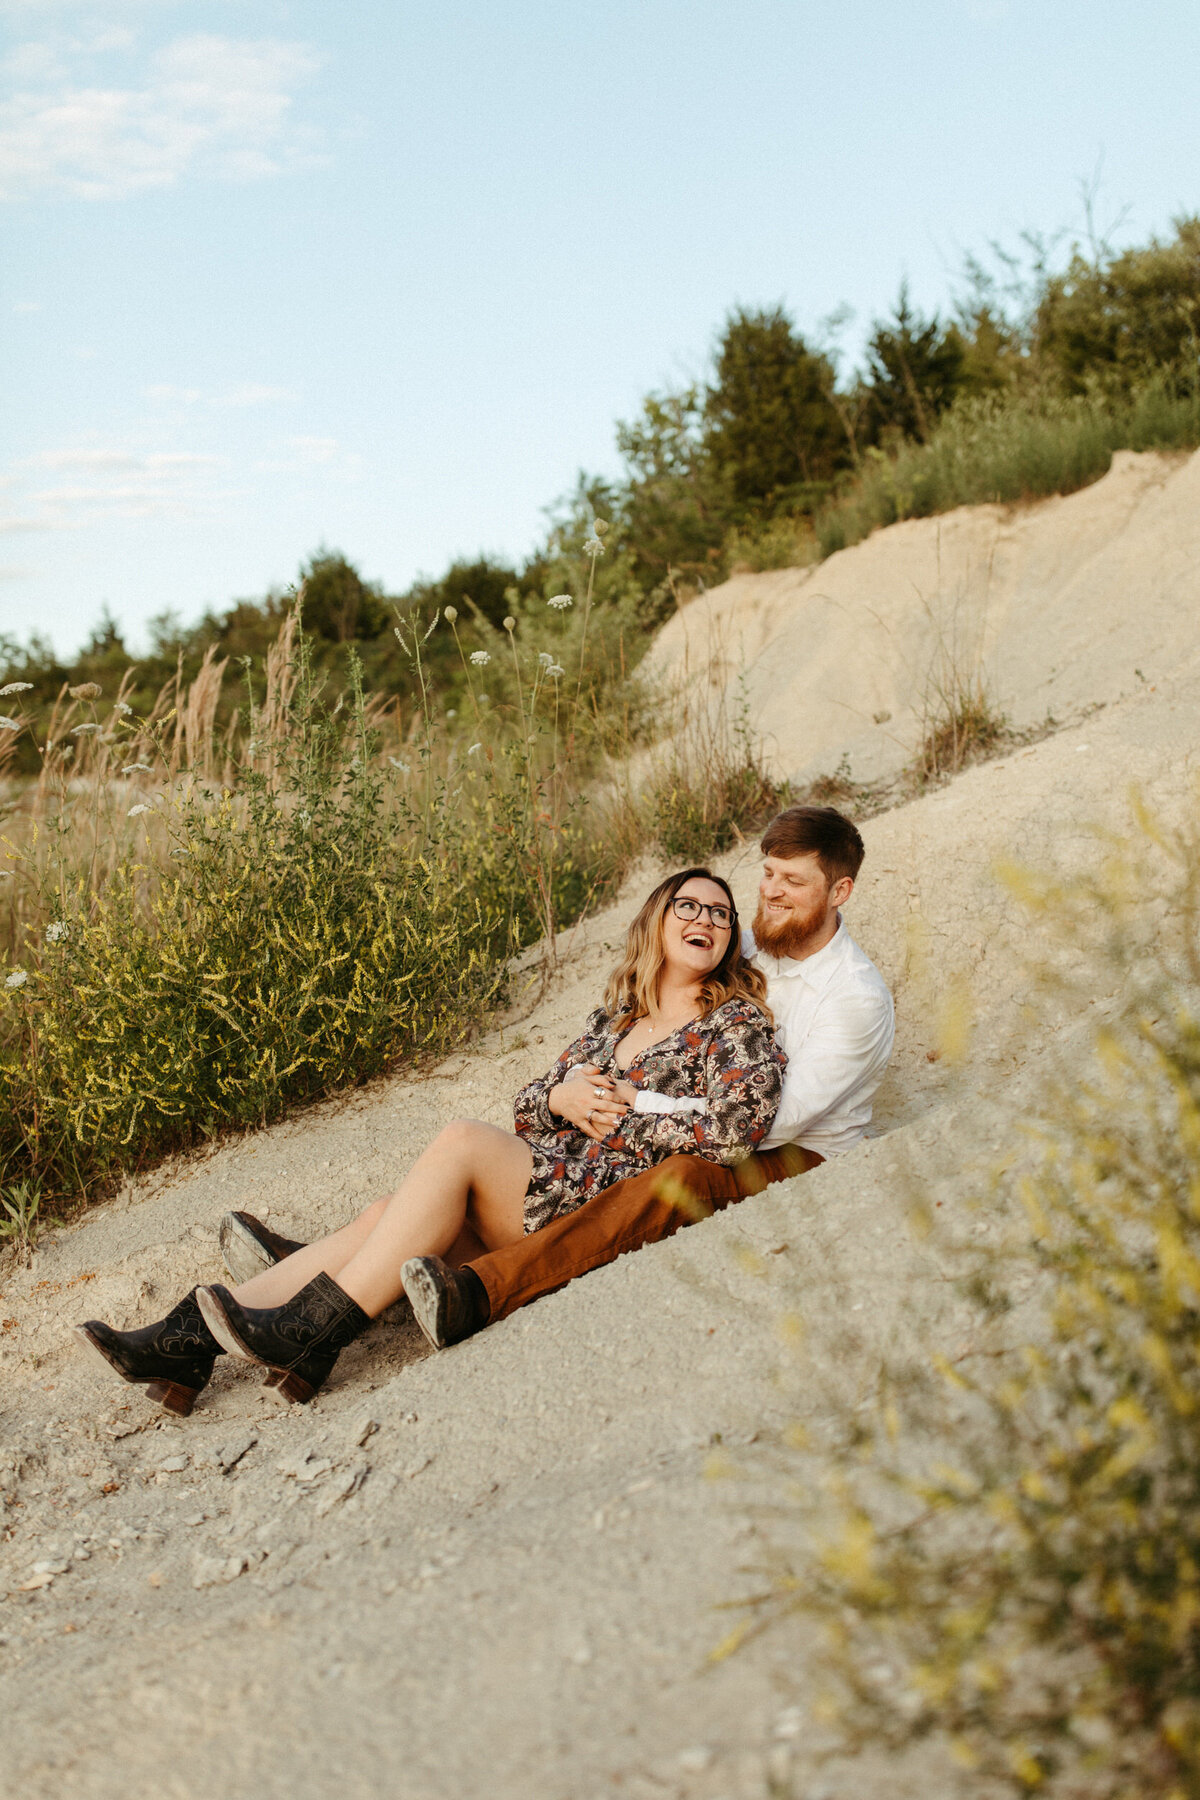 Couple sitting on sand dunes looking at each other and laughing